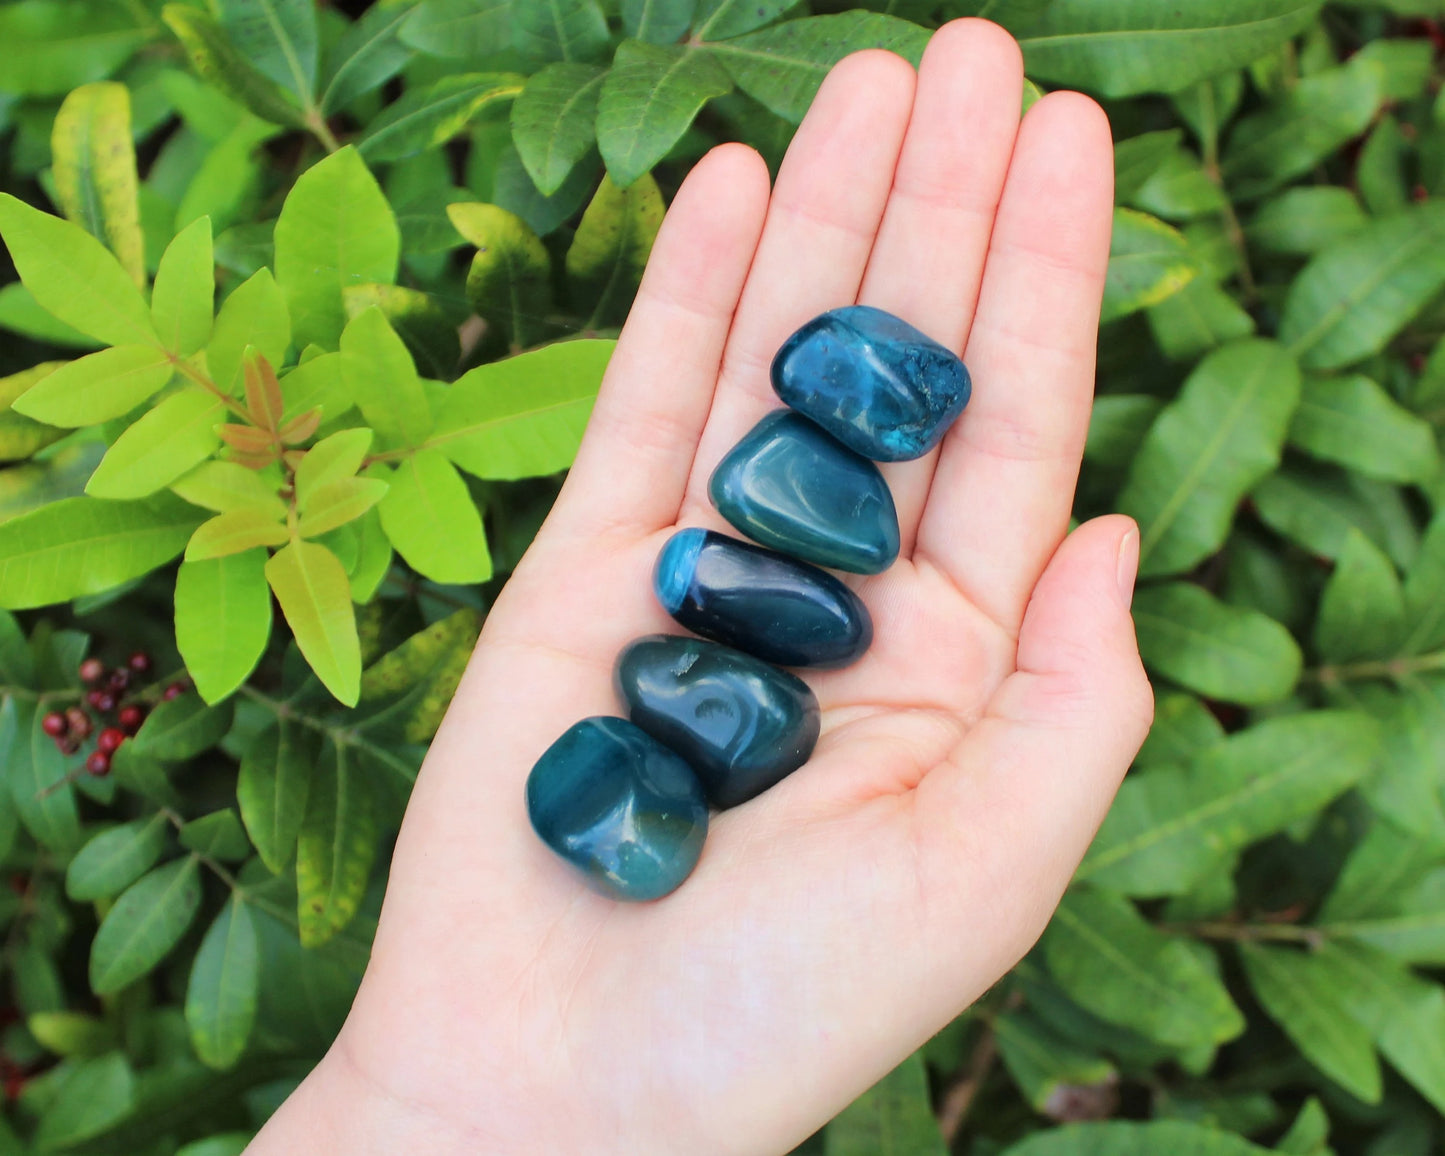 Agate Dyed Tumbled Stones